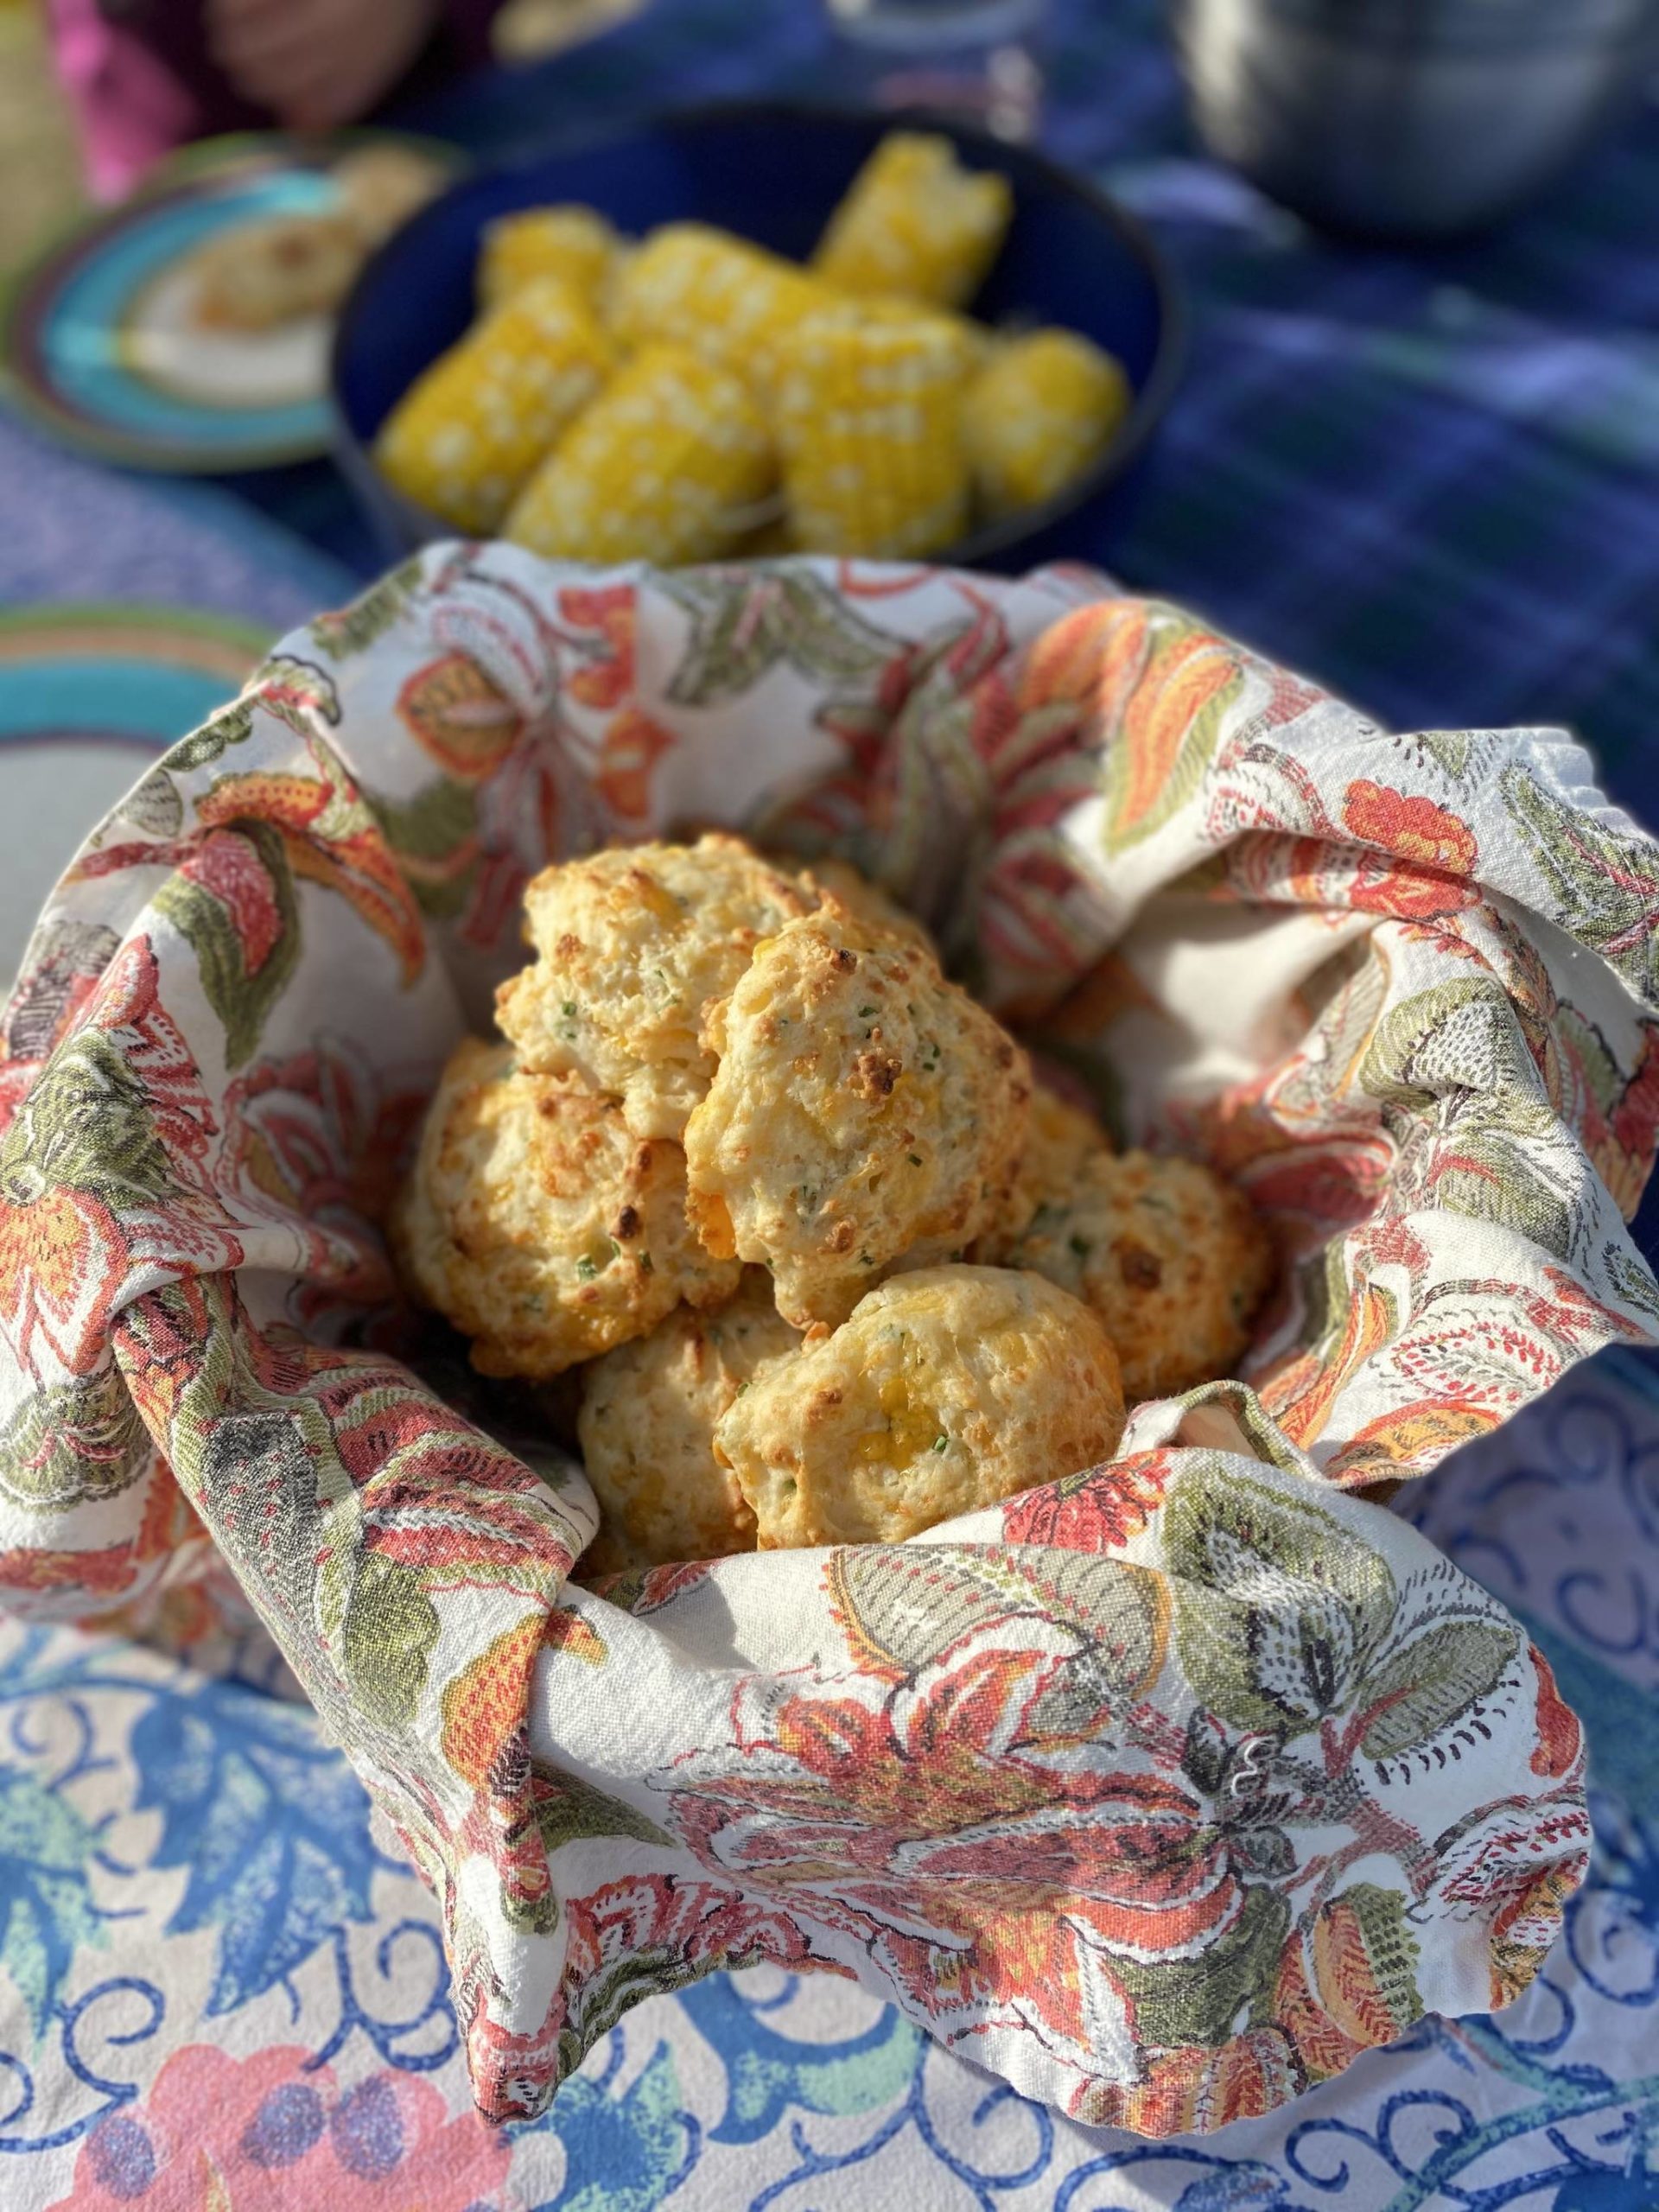 Cheddar biscuits go hand in hand with summer seafood catch. Photographed on Saturday, June 12, 2021, in Nikiski, Alaska. (Photo by Tressa Dale)